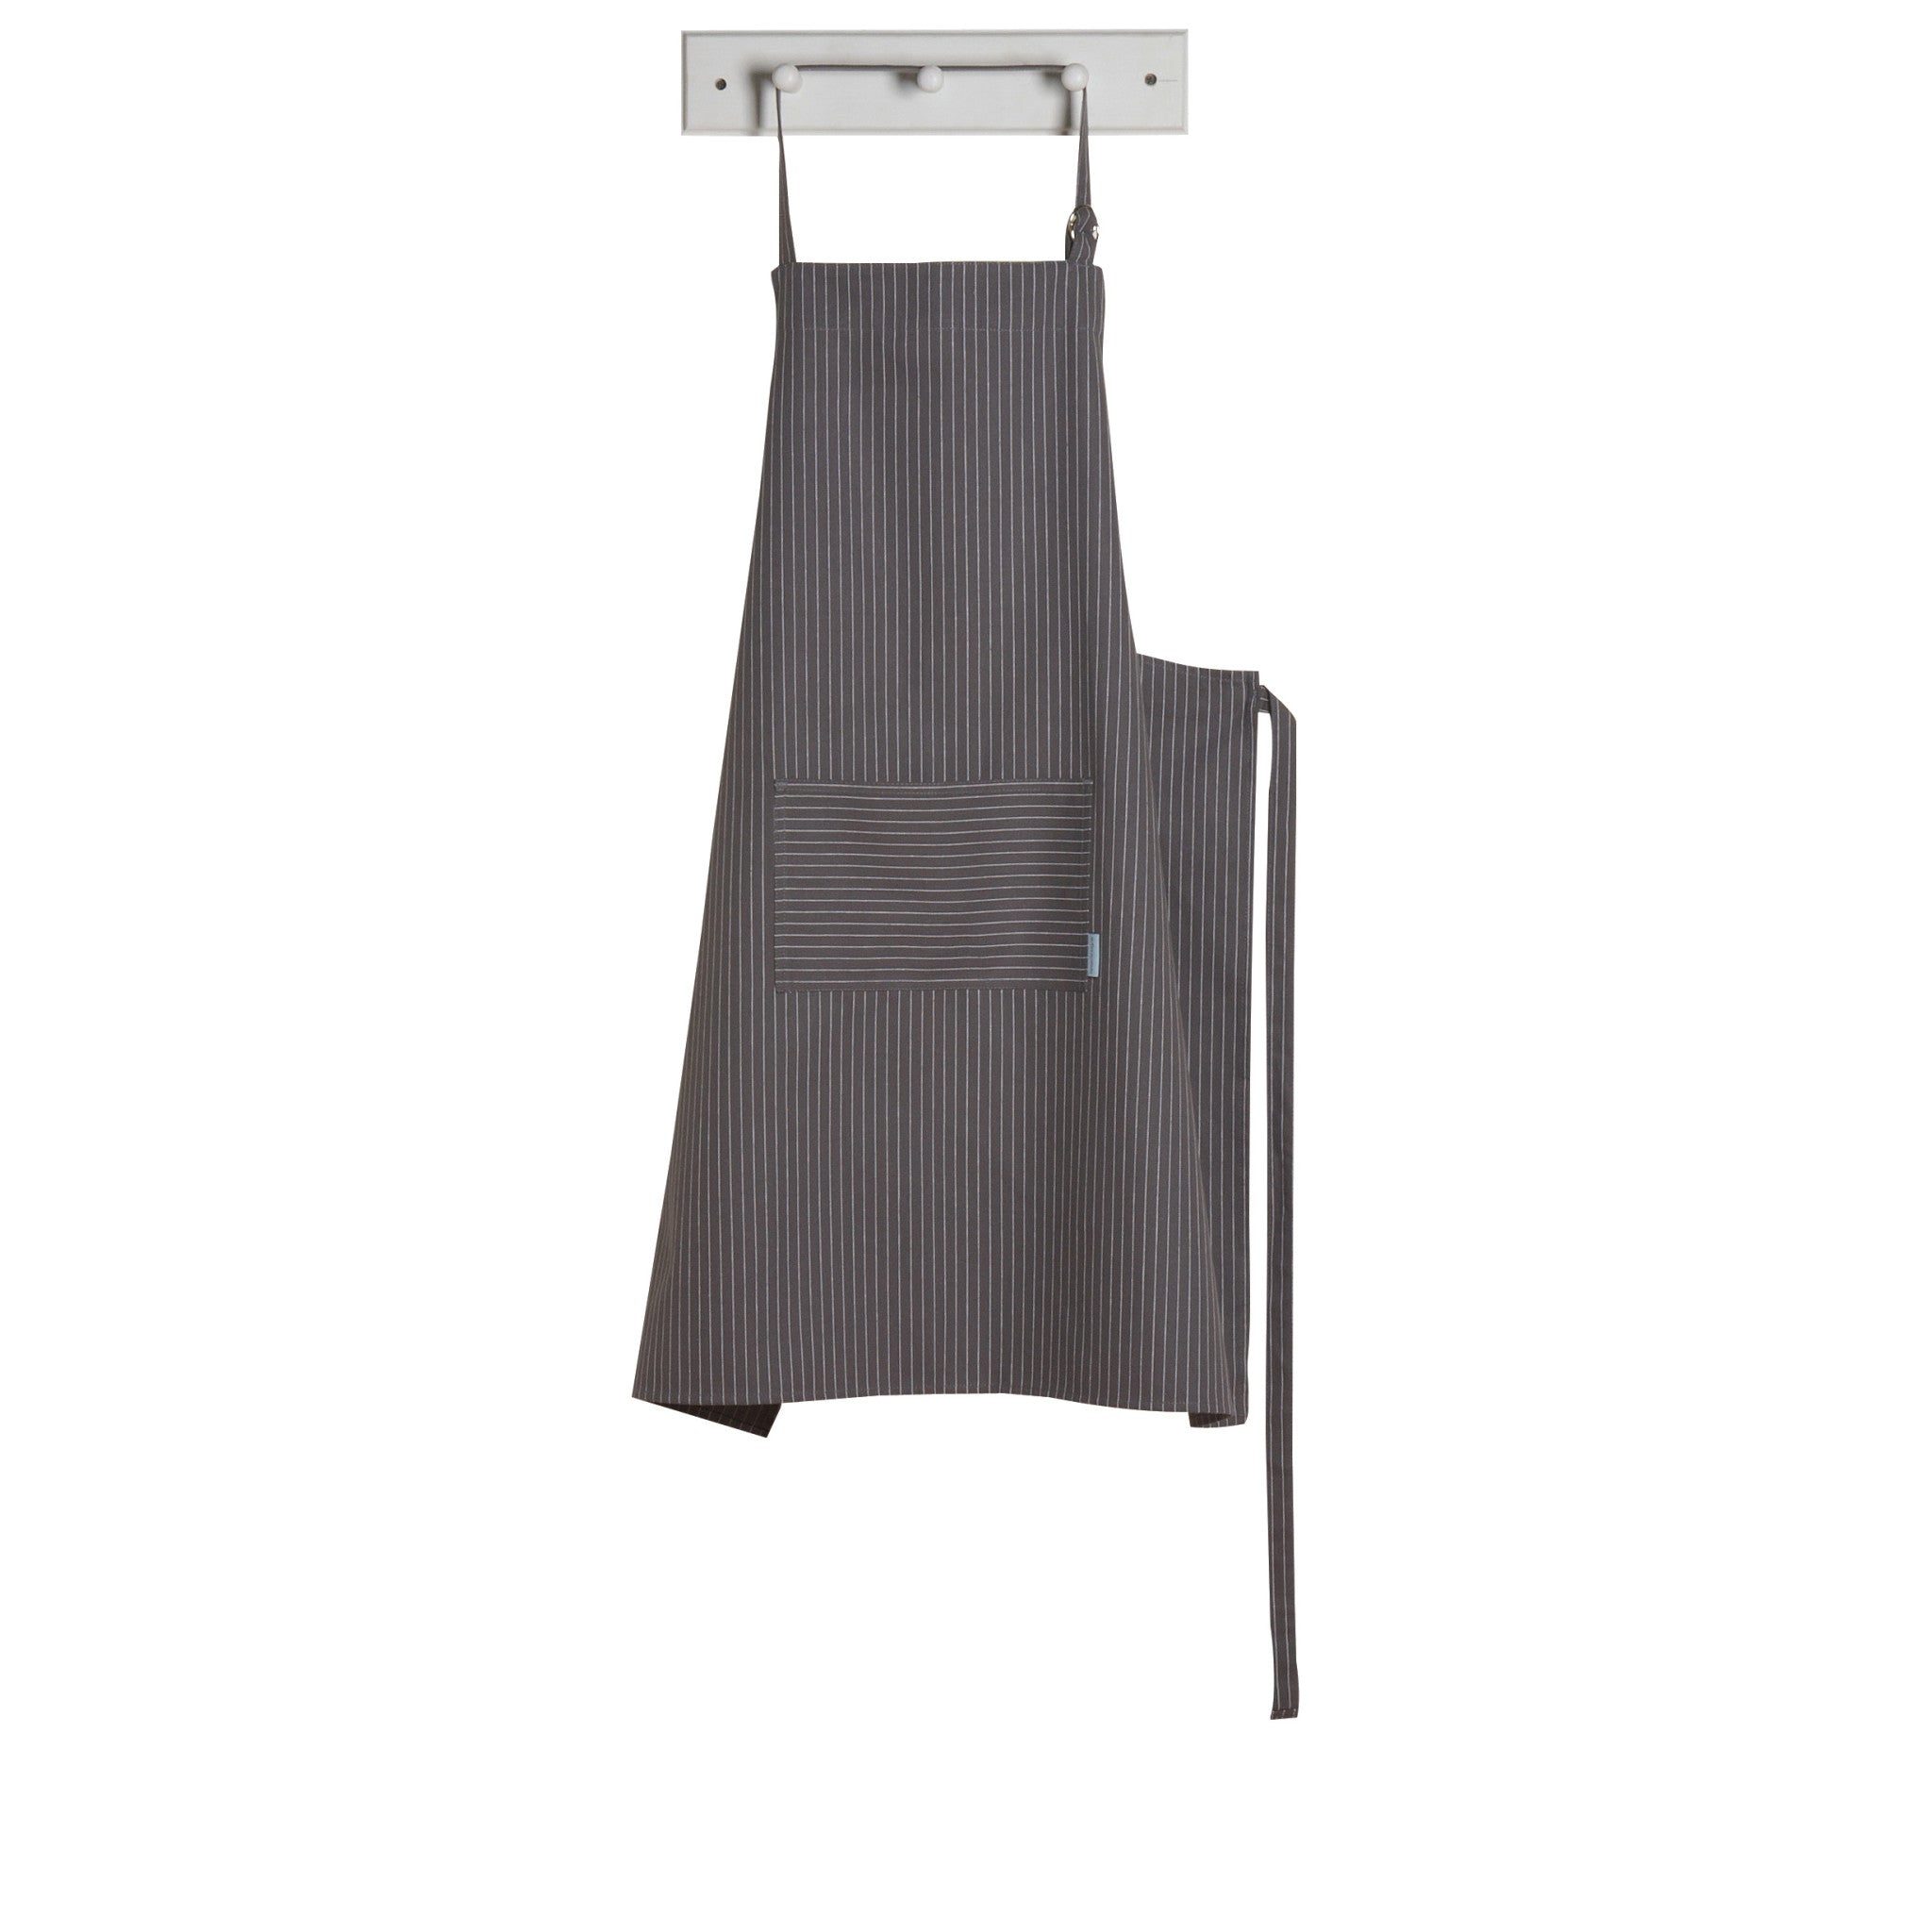 Mighty Aprons